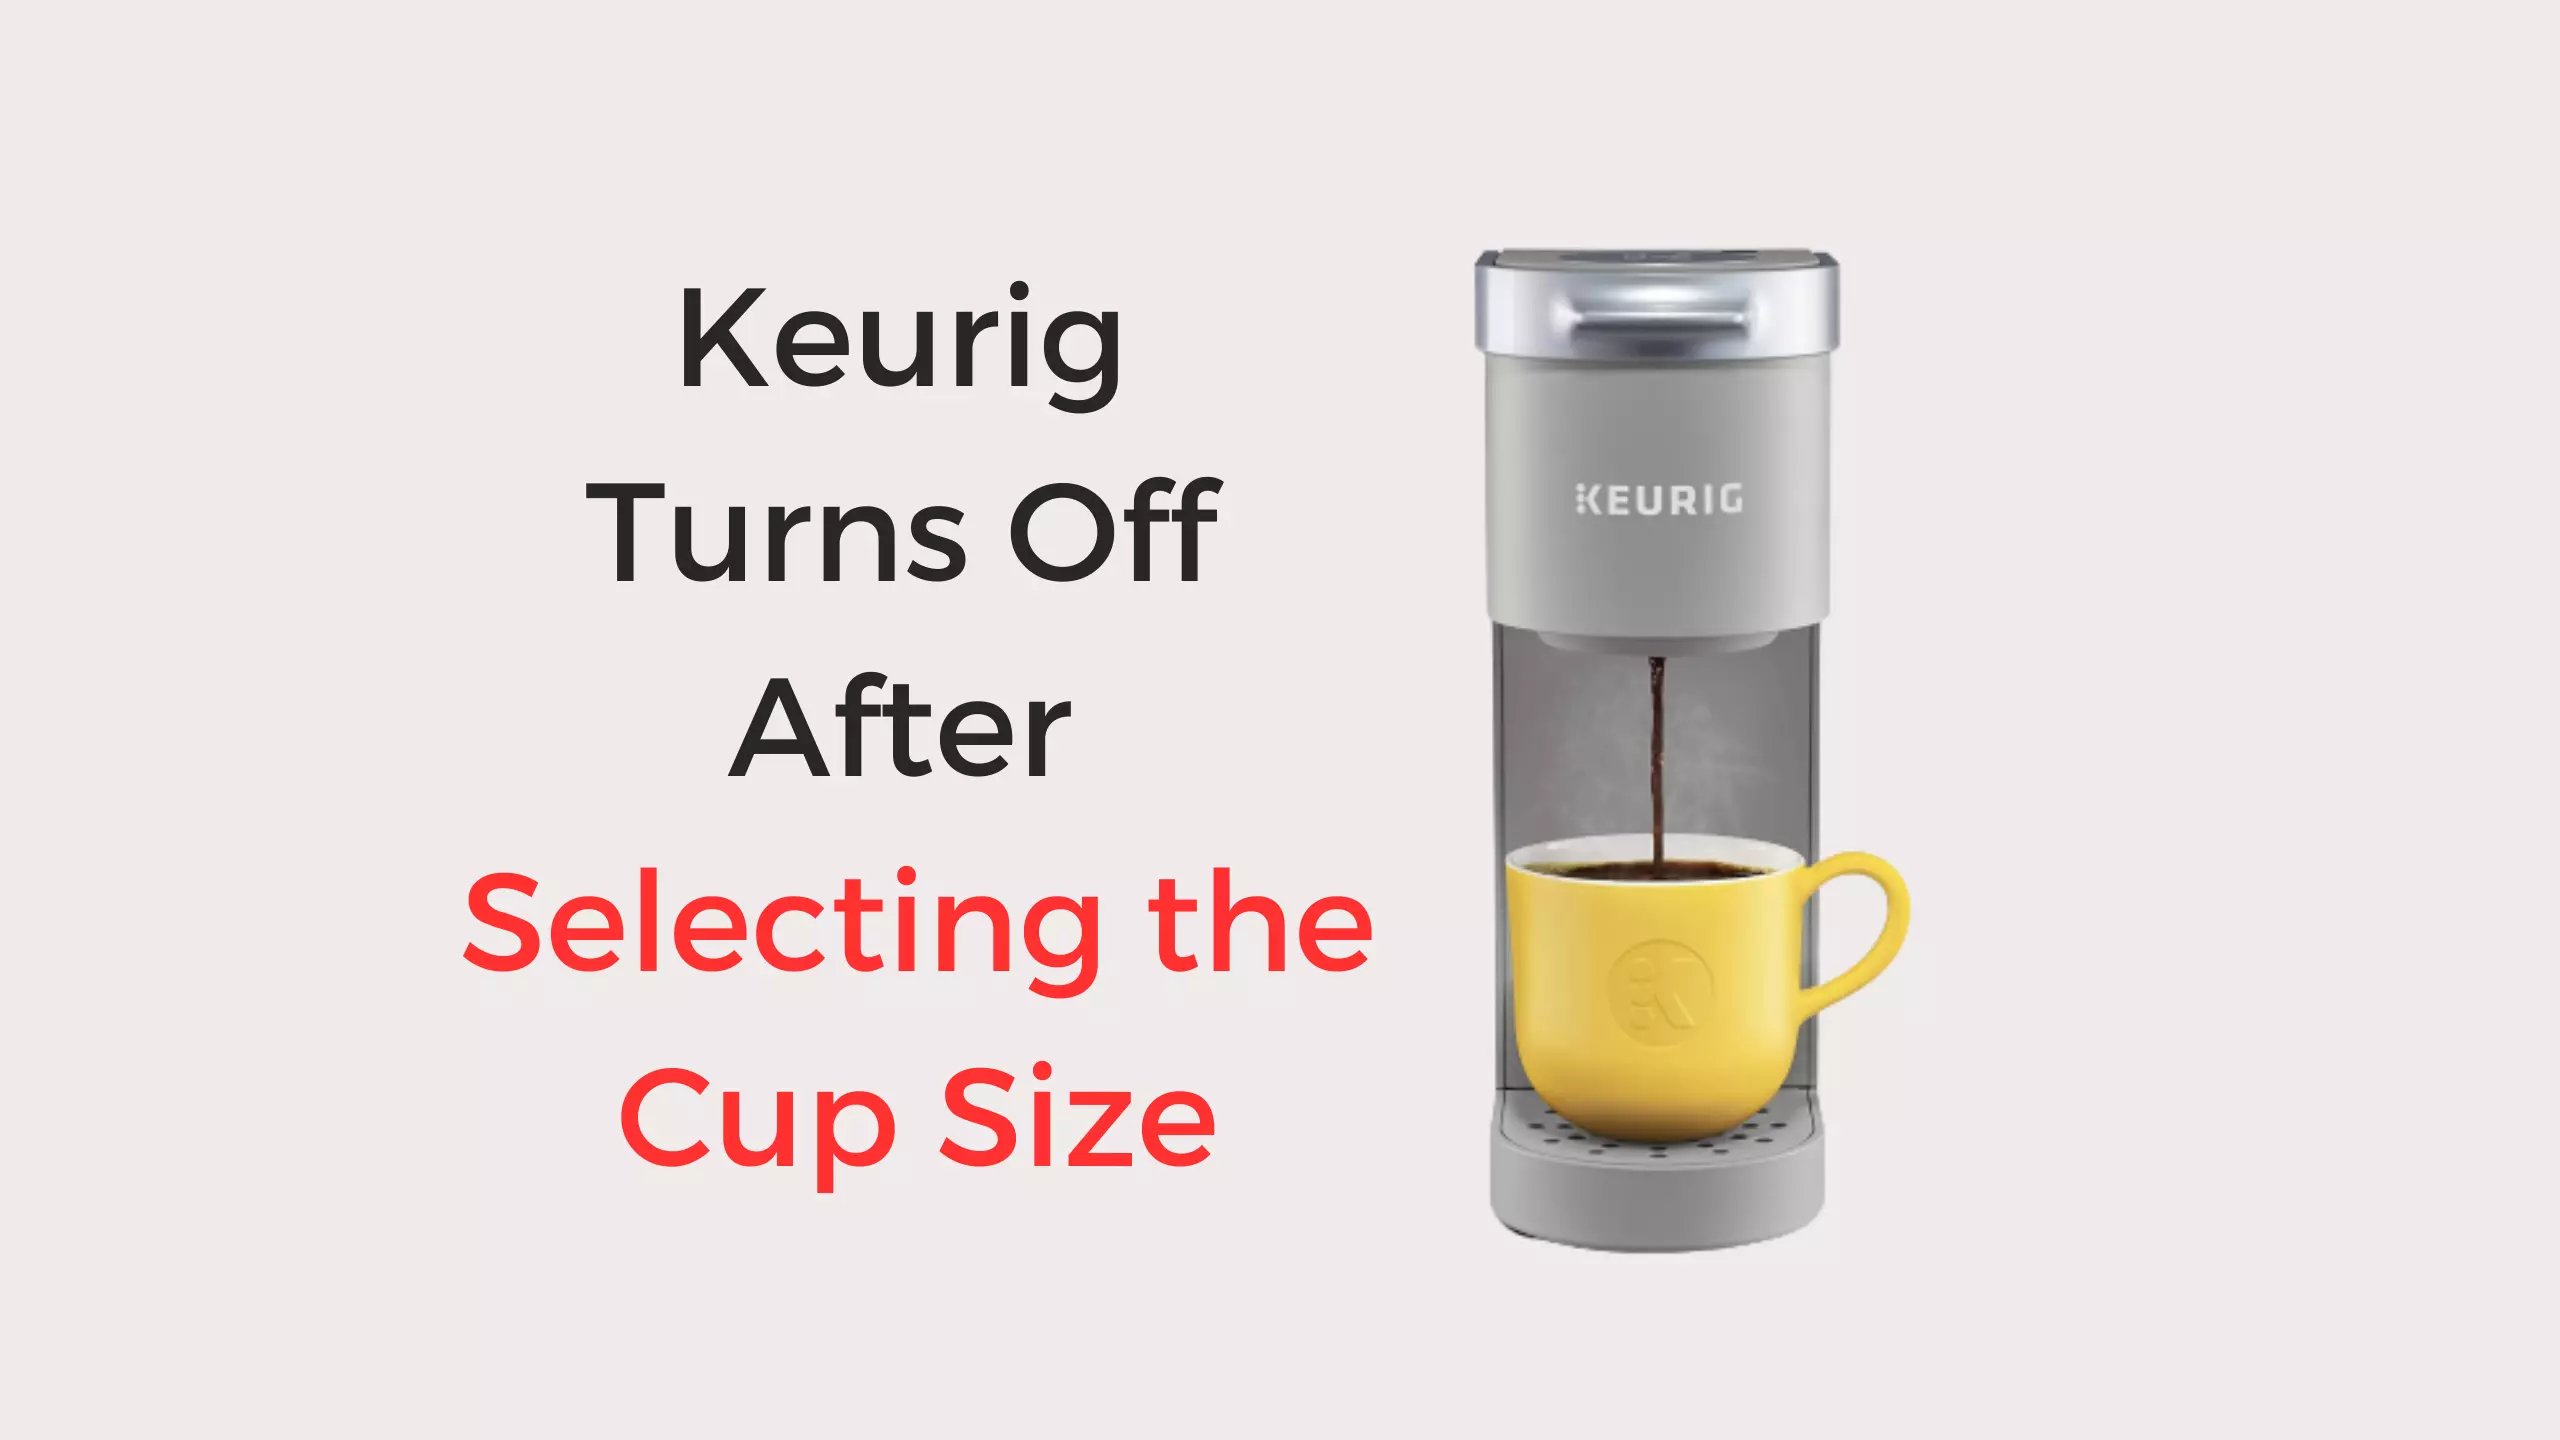 keurig turns off after selecting the cup size